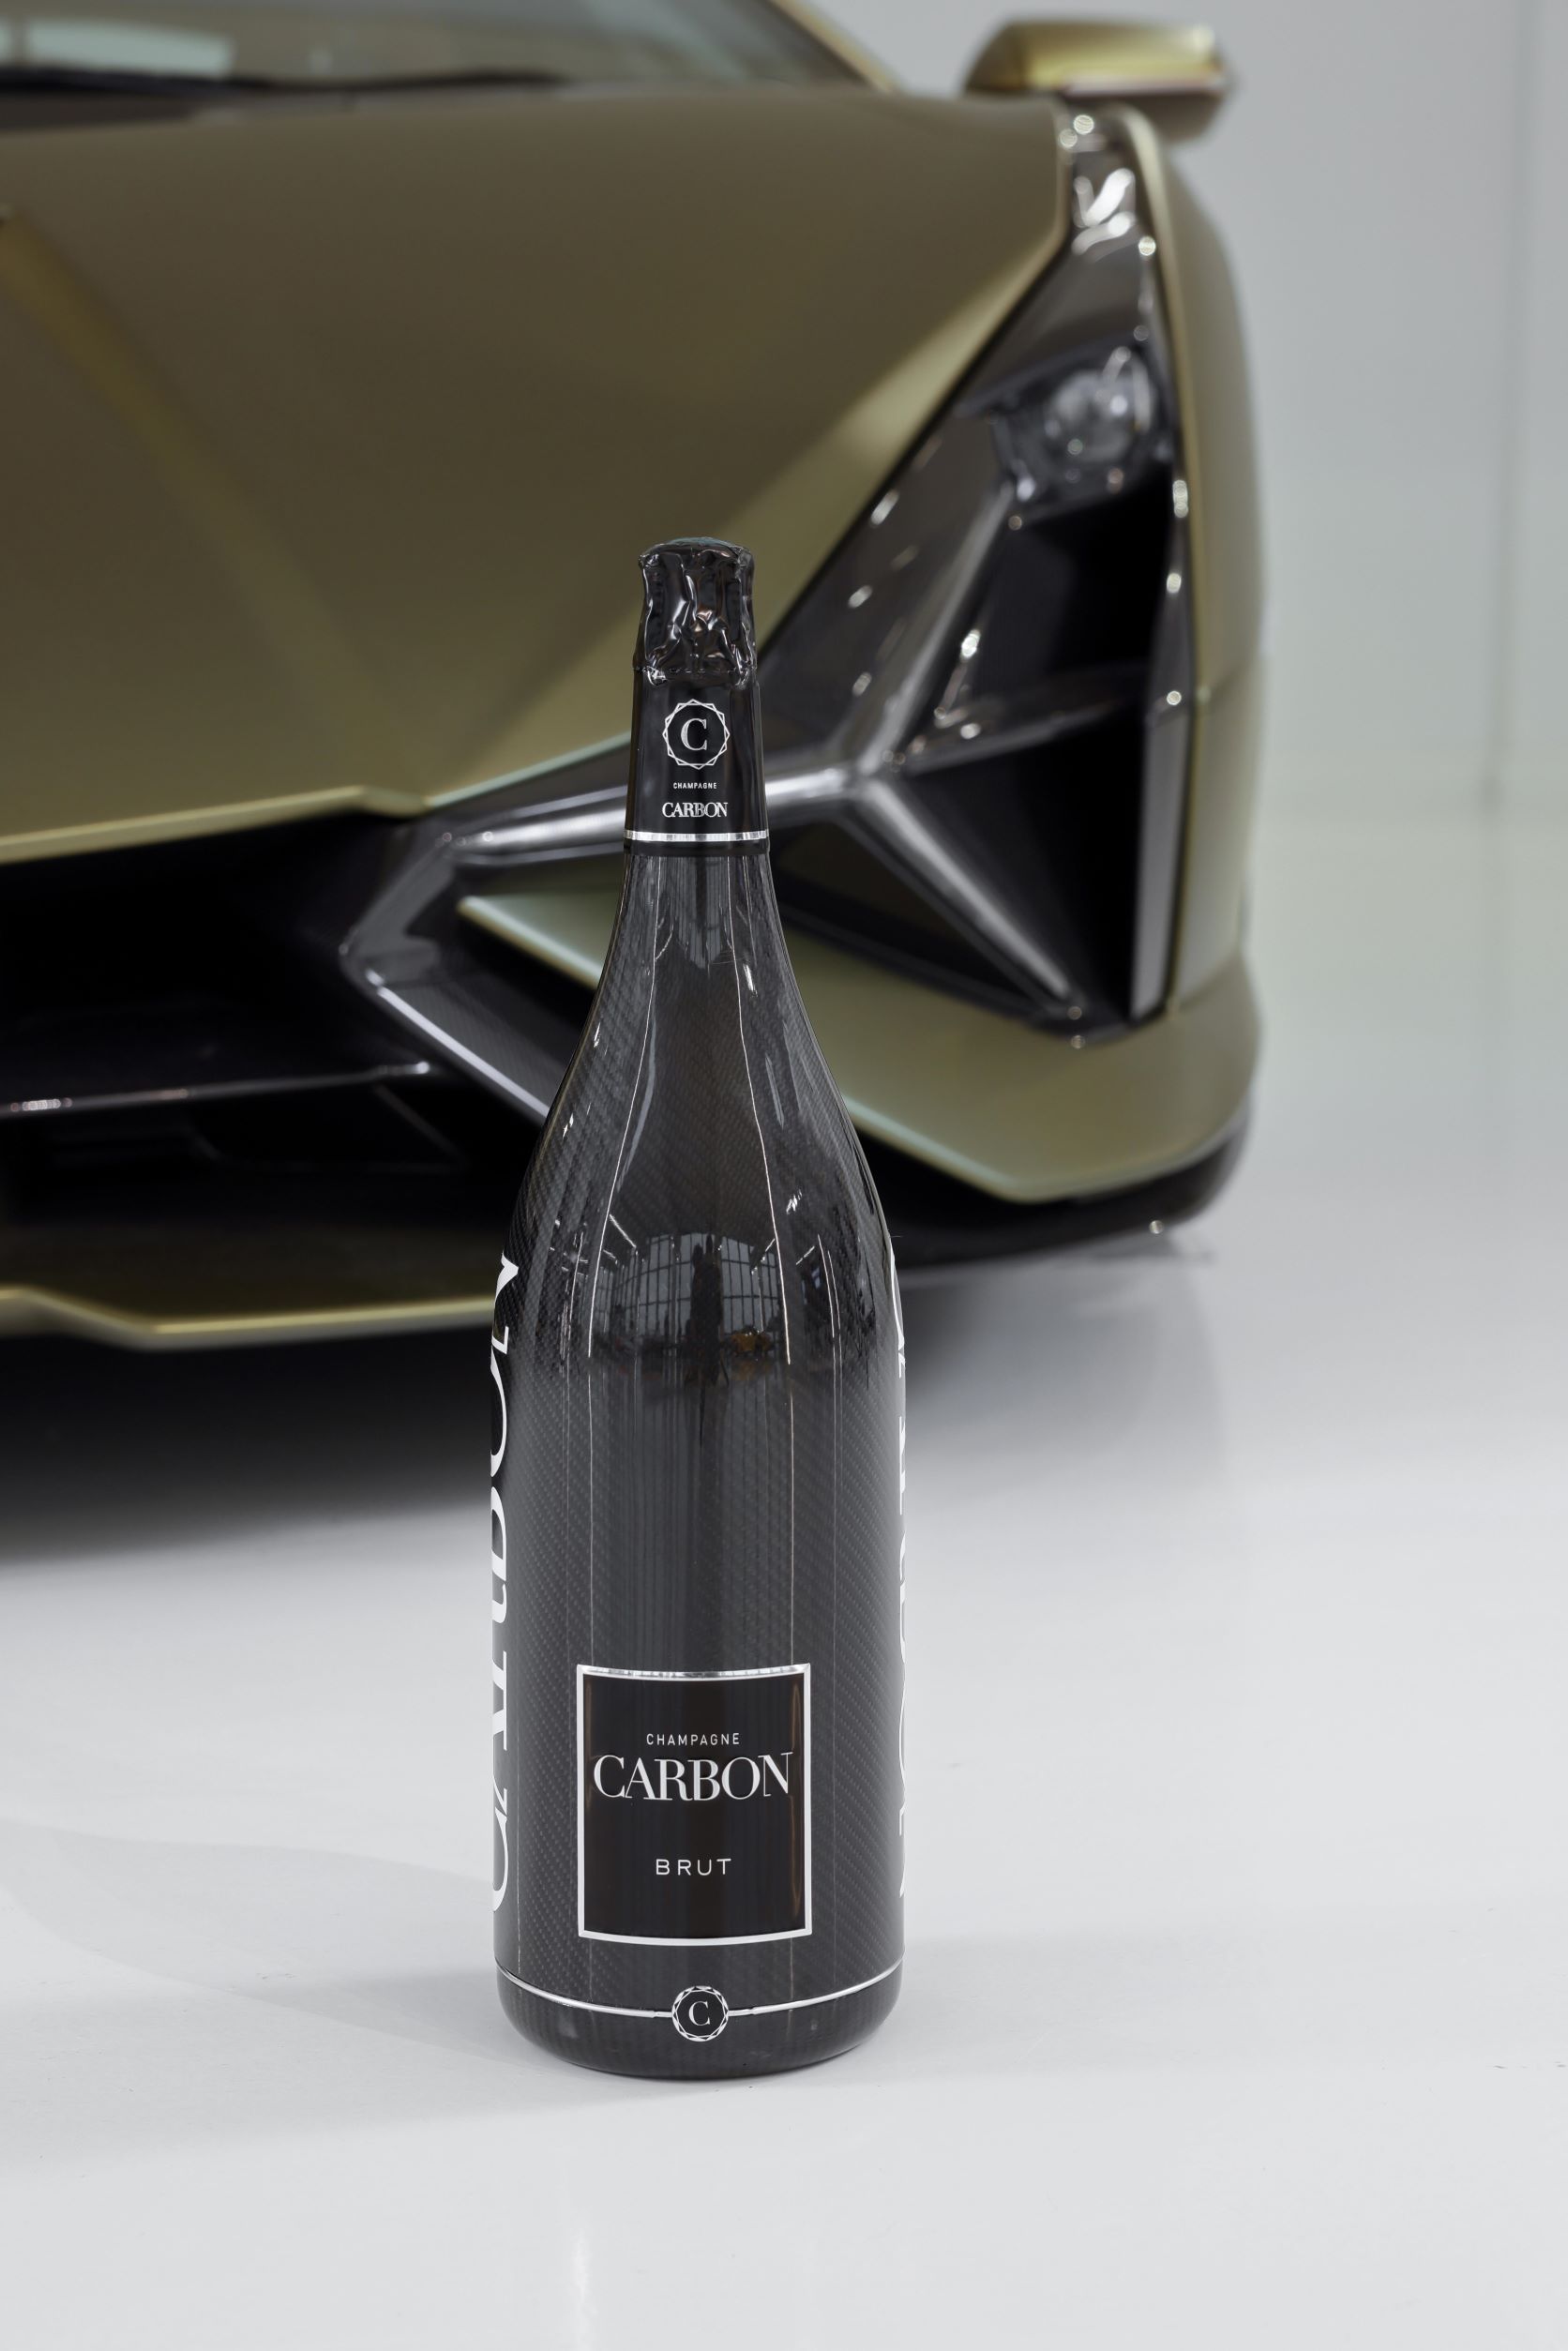 A green colour bottle of Champagne Carbon presented in front of a Lamborghini Sian